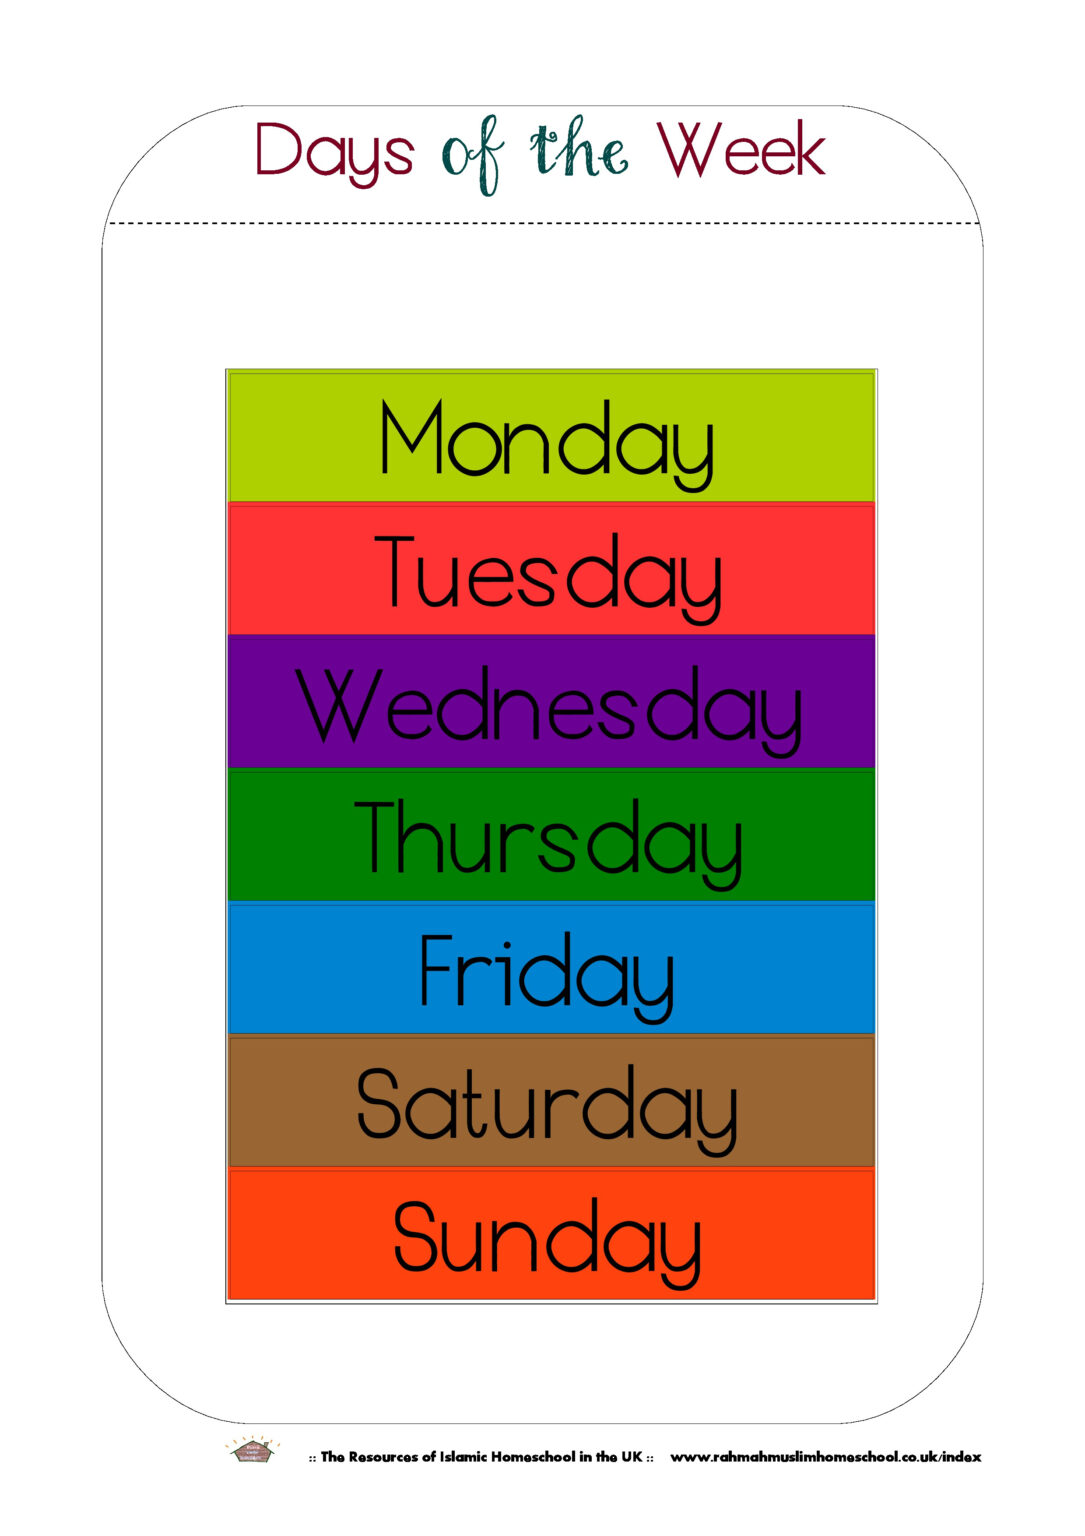 Free Printable French Worksheets Days Of The Week